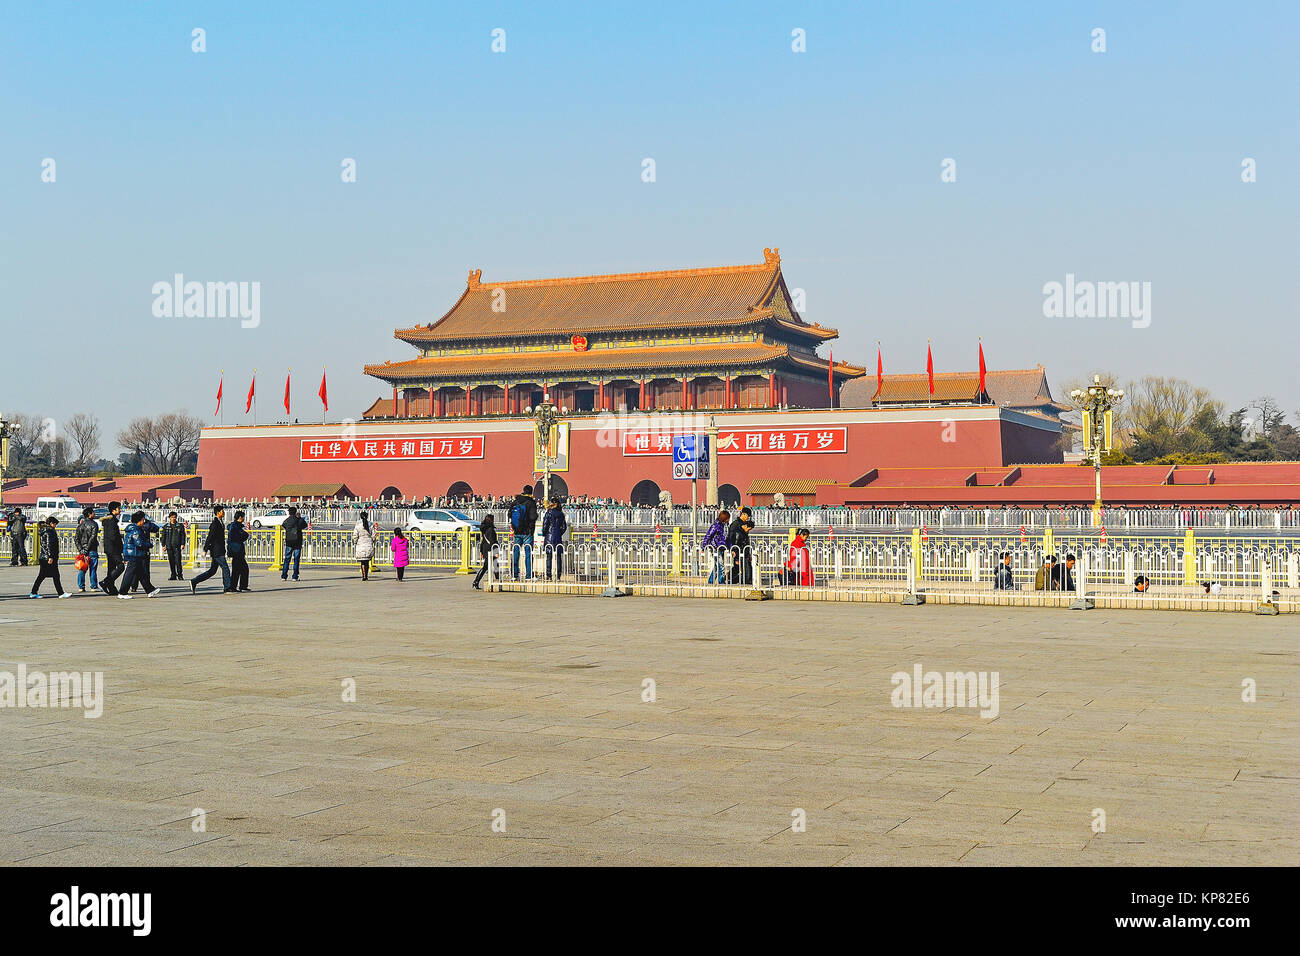 Tiananmen Tower (Gate of Heavenly Peace) at the northern edge of Tiananmen Square in Beijing, China. Stock Photo